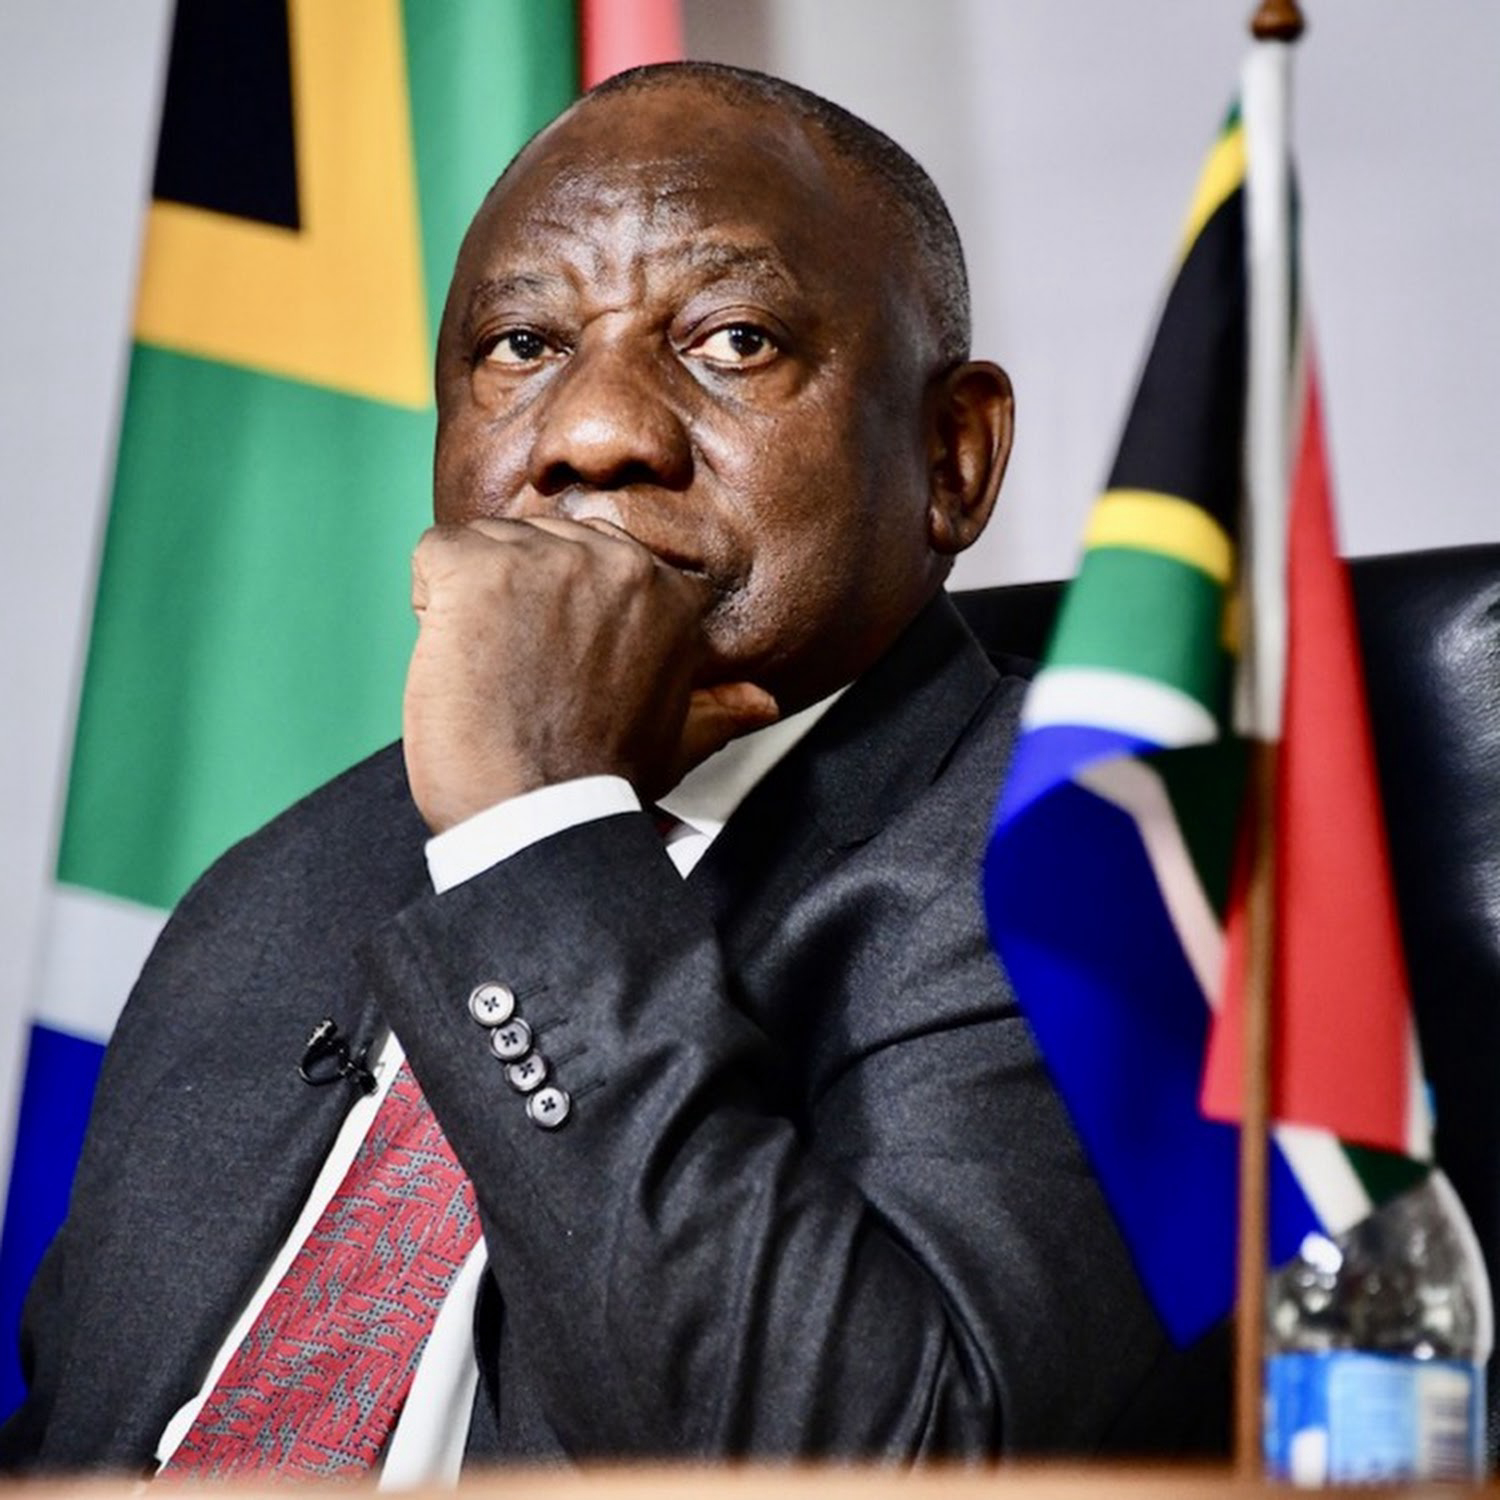 Ramaphosa Survives Impeachment, Set to Win Second Term | The African Exponent.